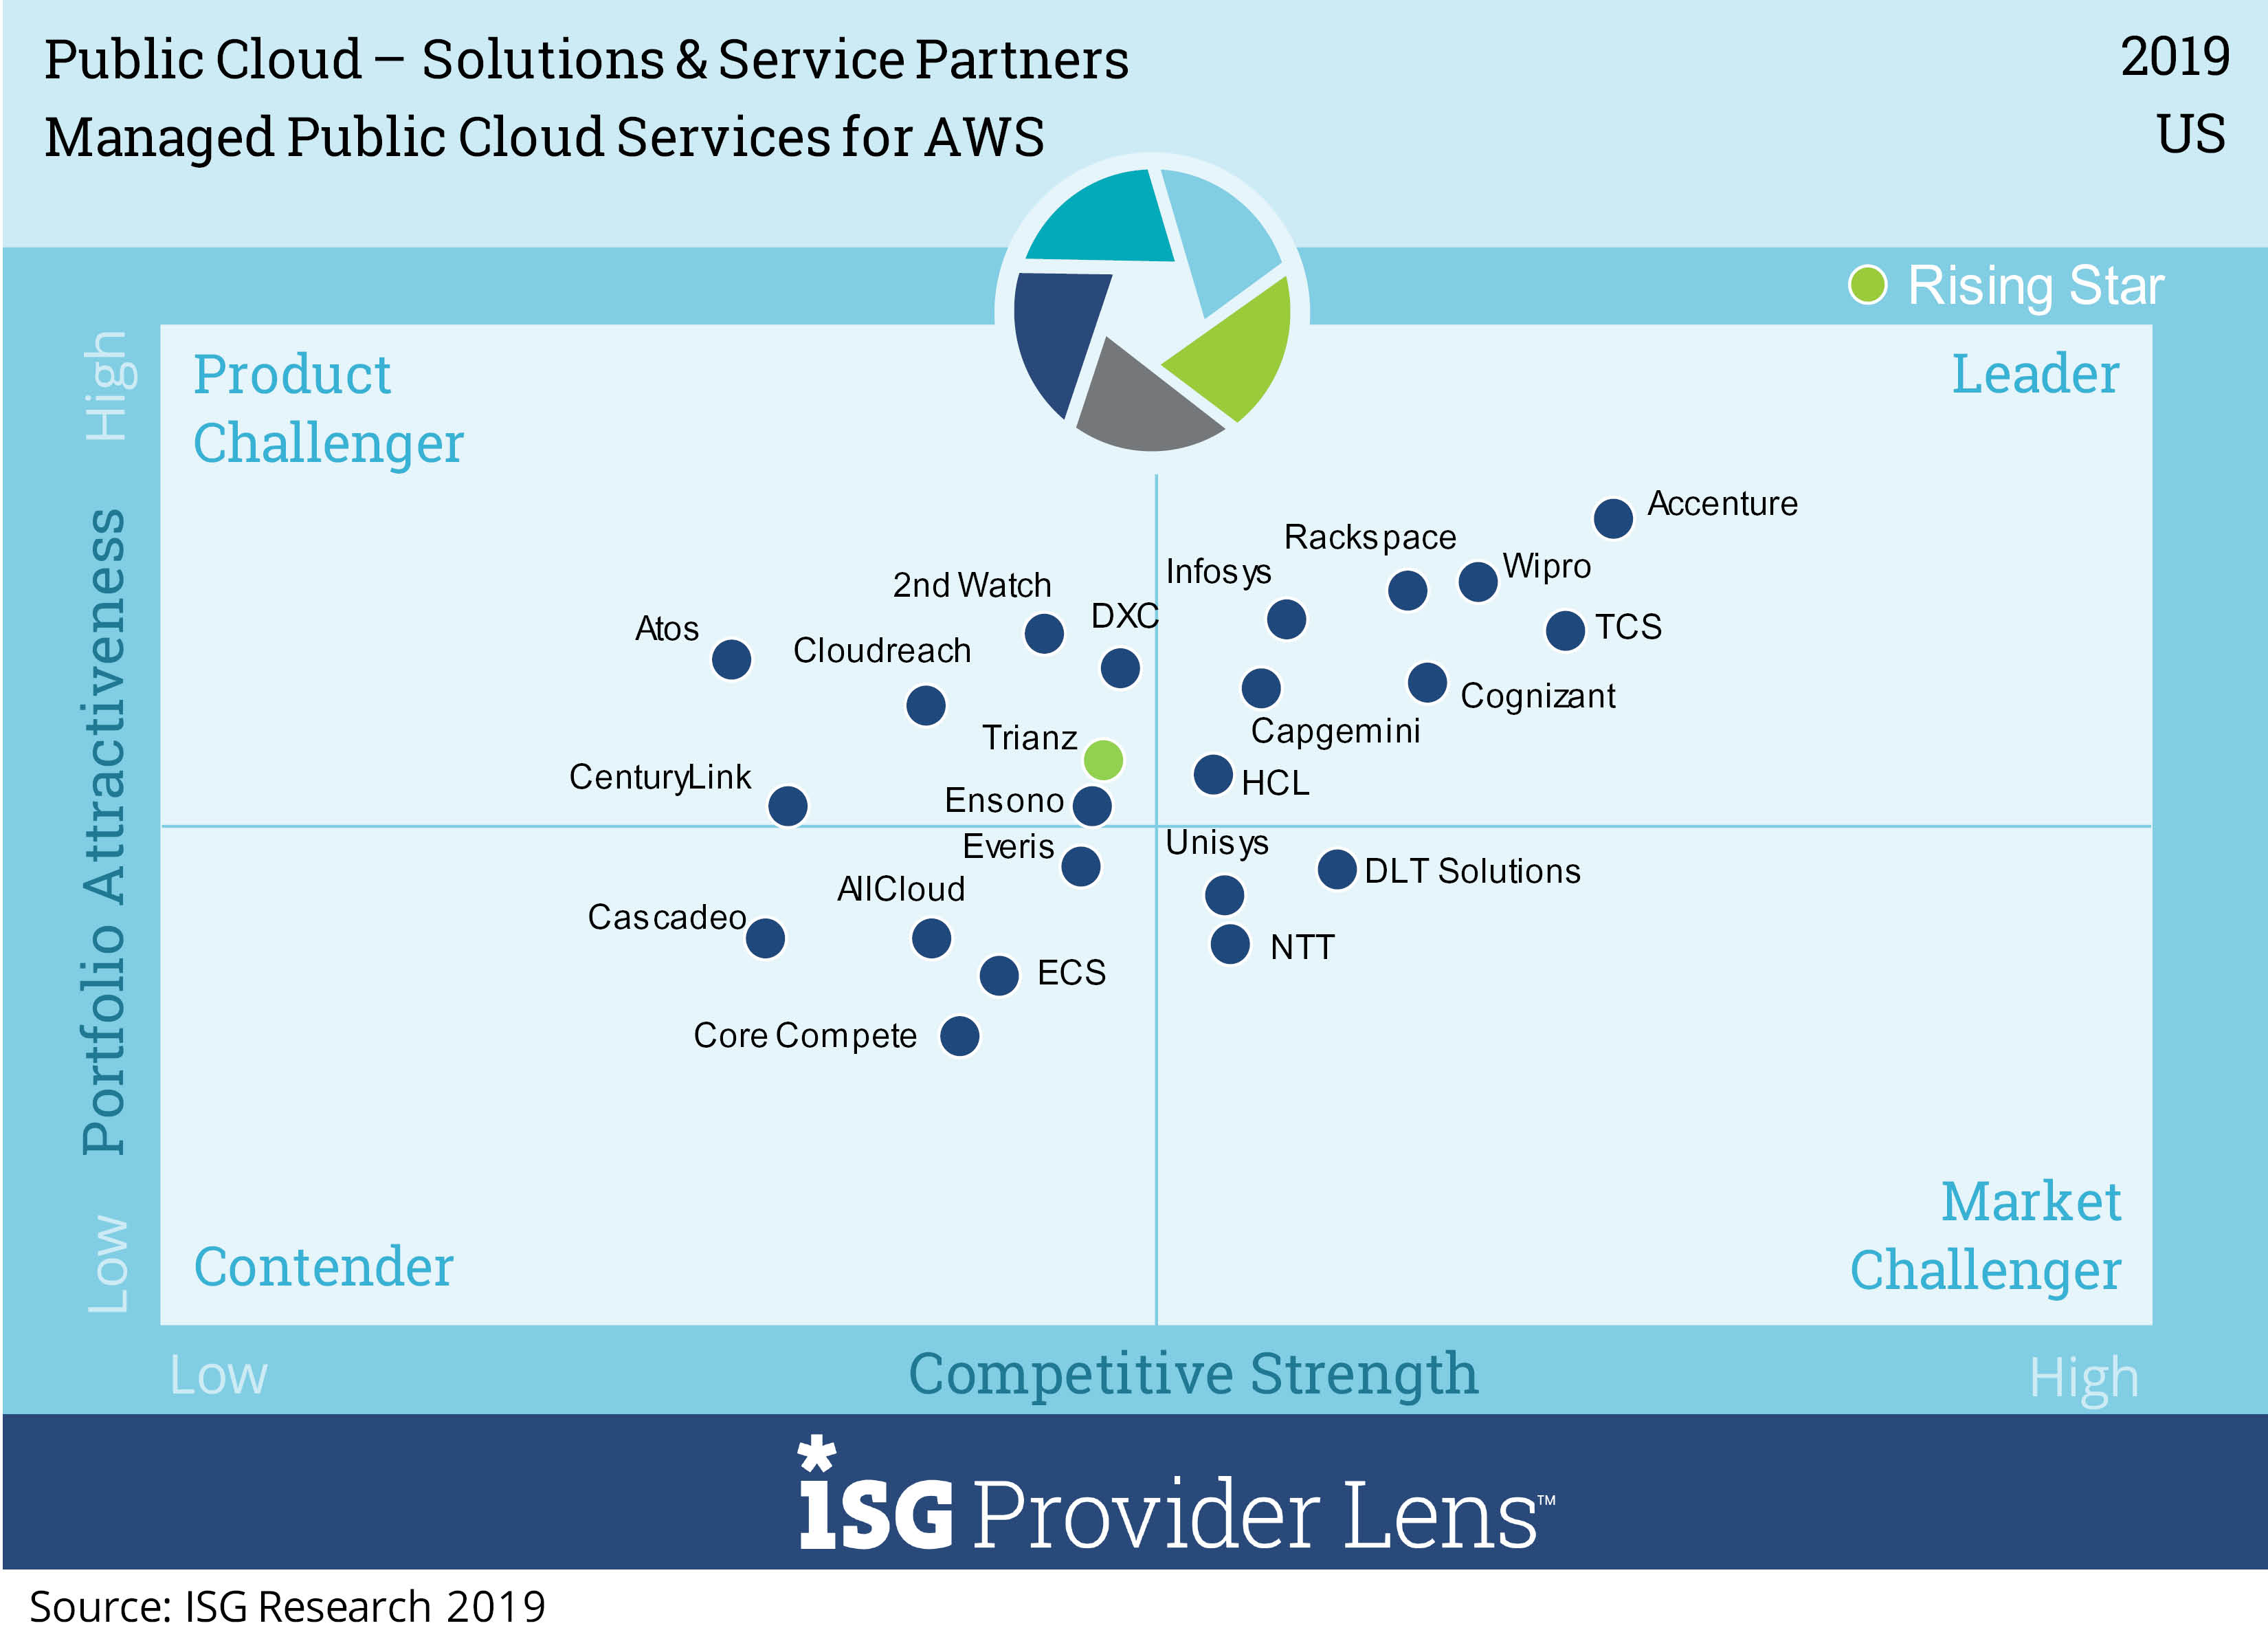 Wipro has been positioned as a US, UK, Nordics Leader in Public Cloud – Solutions & Service Partners - ISG Provider Lens™ study 2019 for AWS